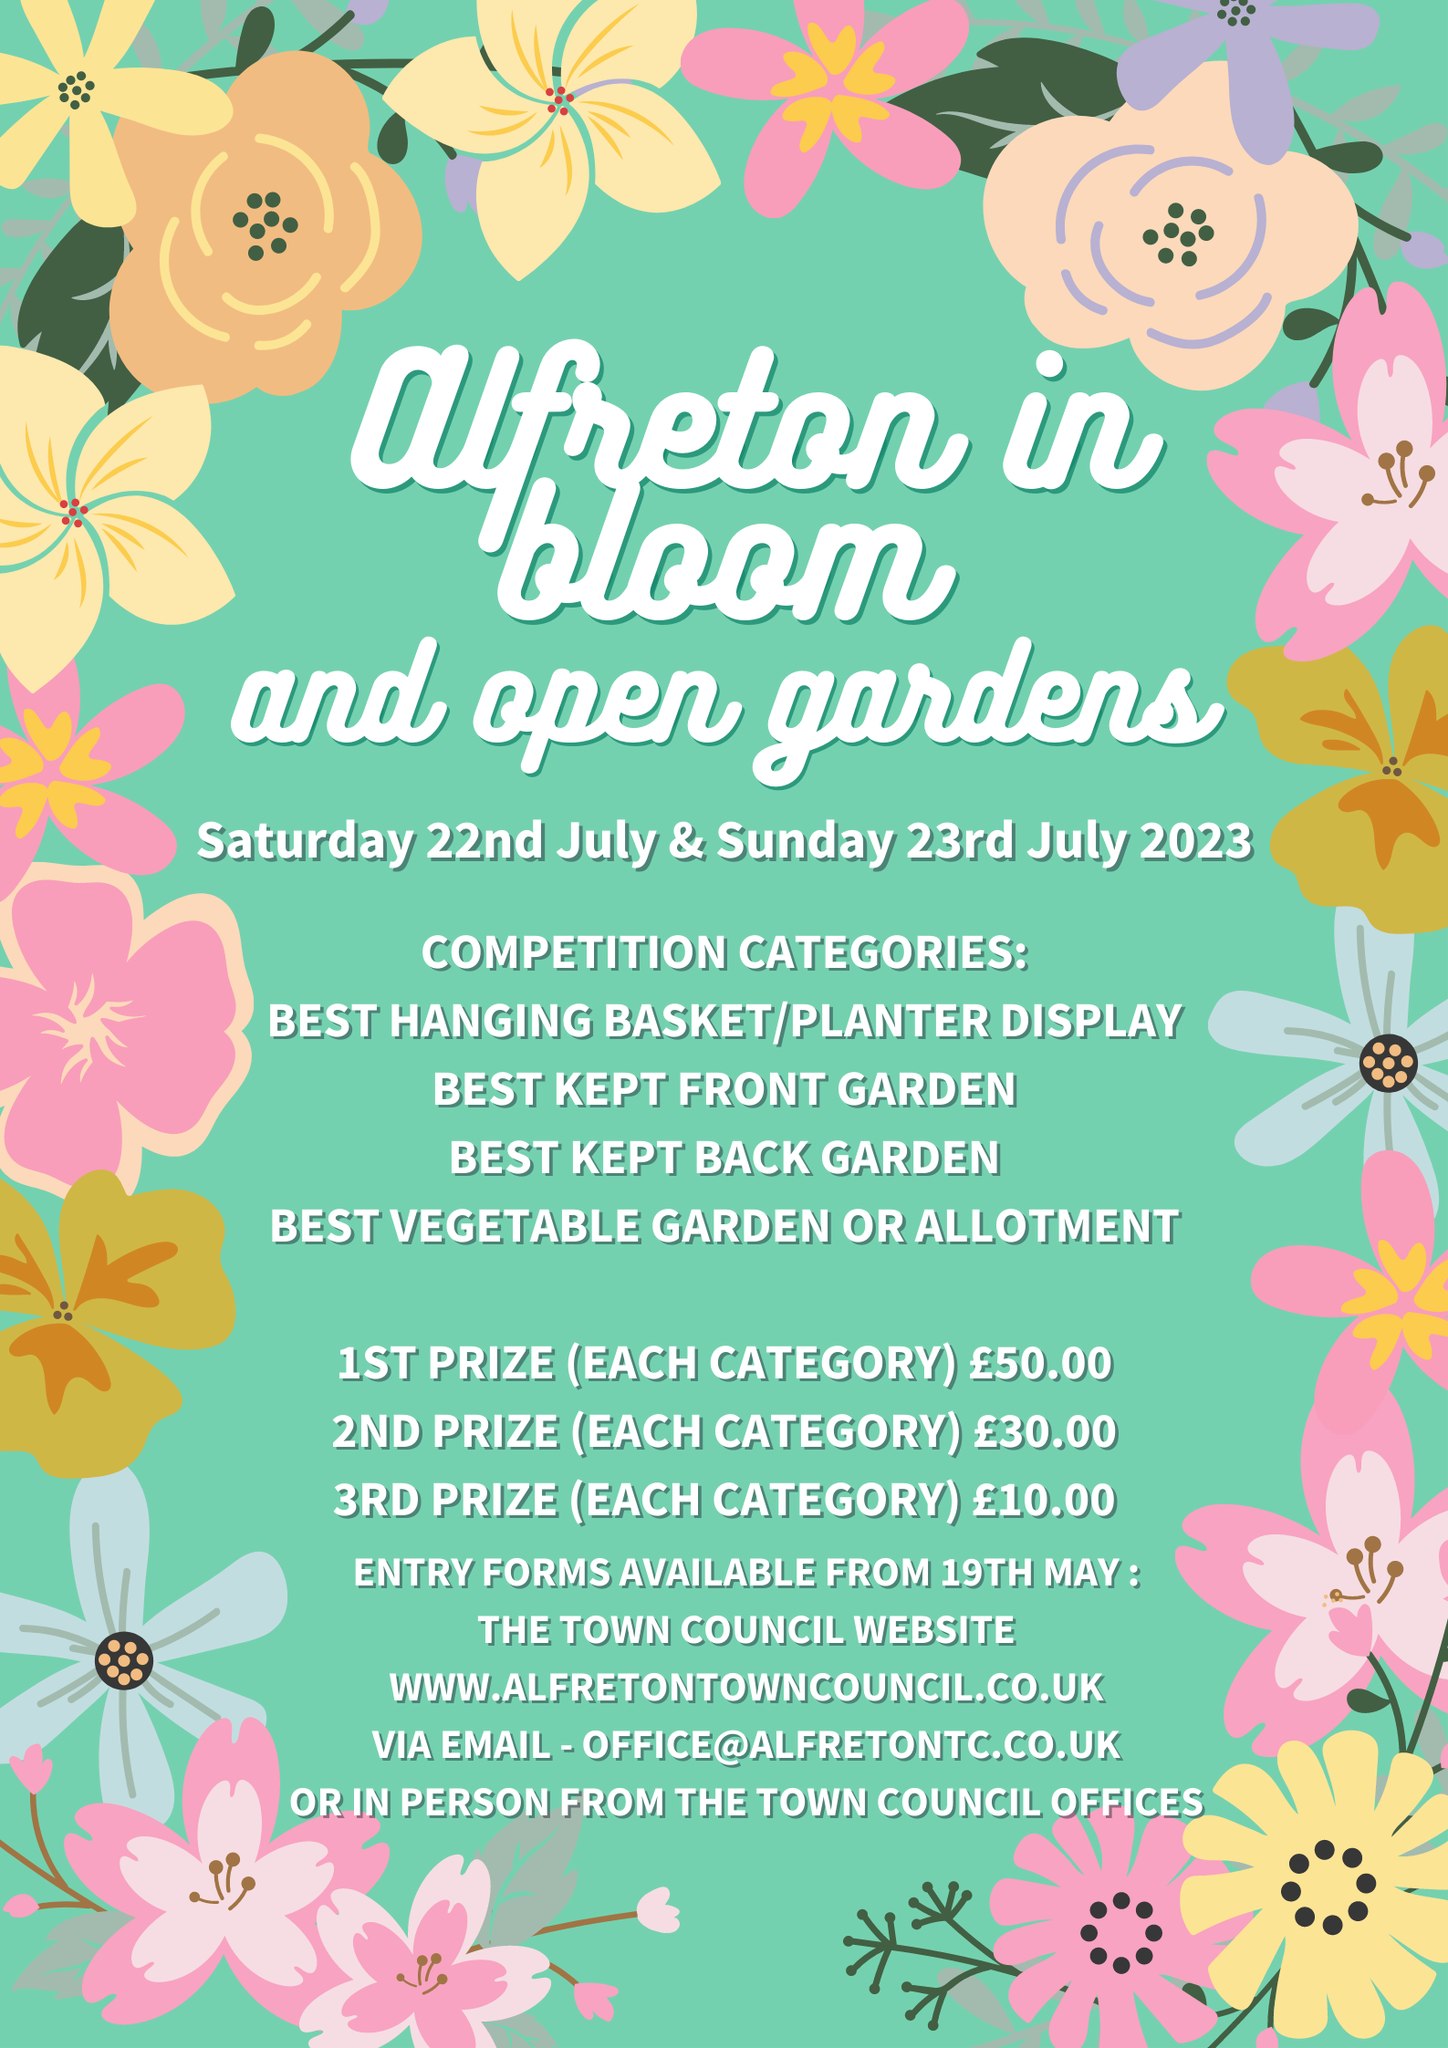 The Alfreton in Bloom Competition is now open